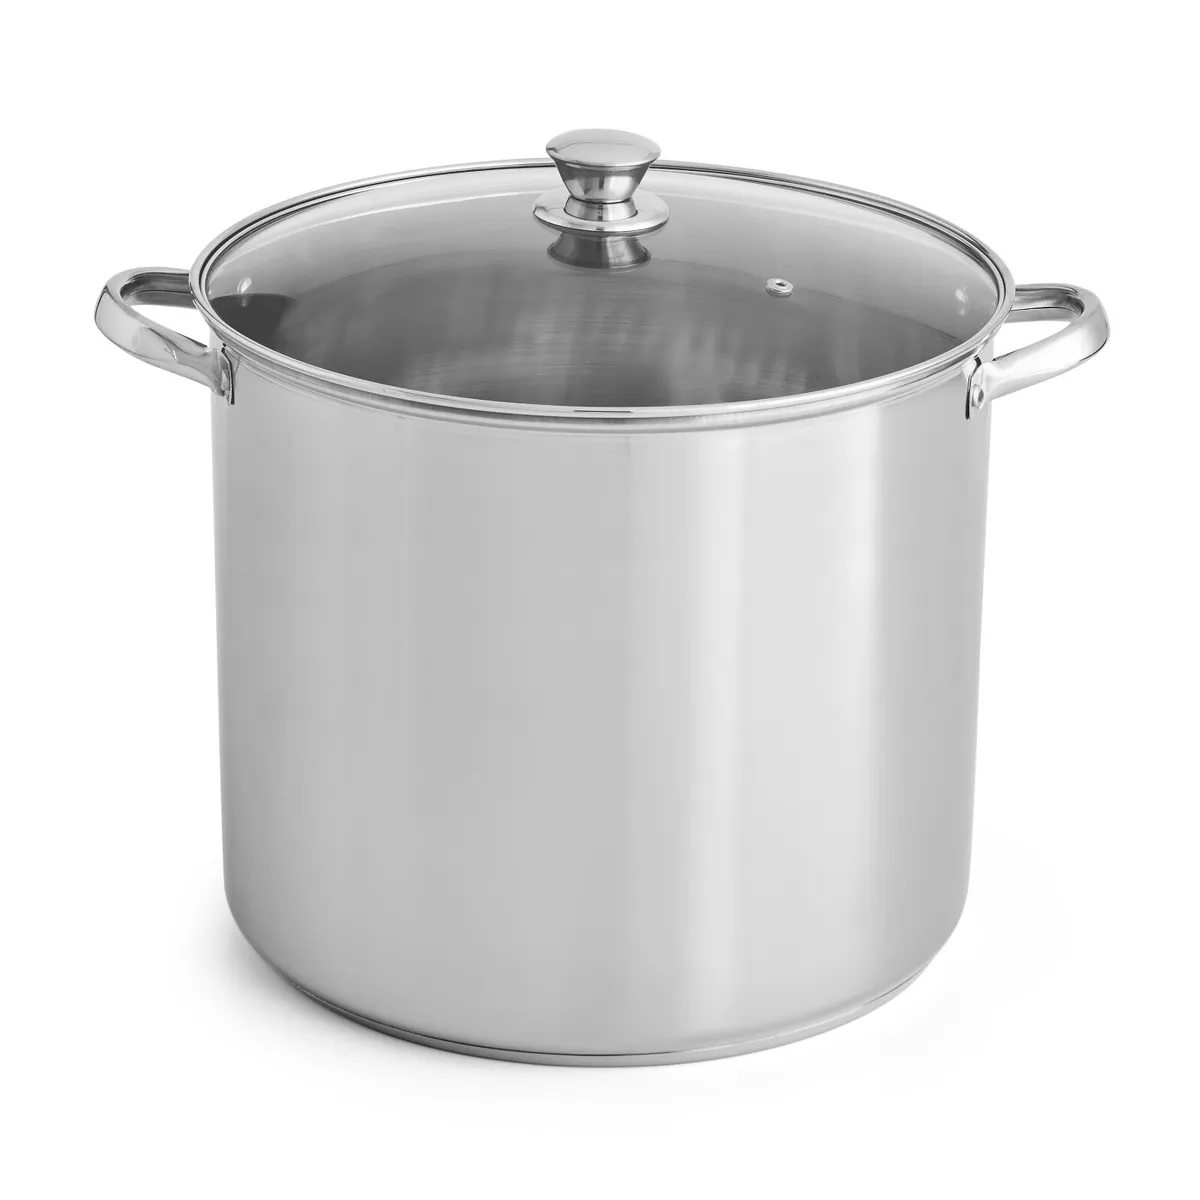 20 Quart Stock Pot Stainless Steel Large Kitchen Soup Big Cooking